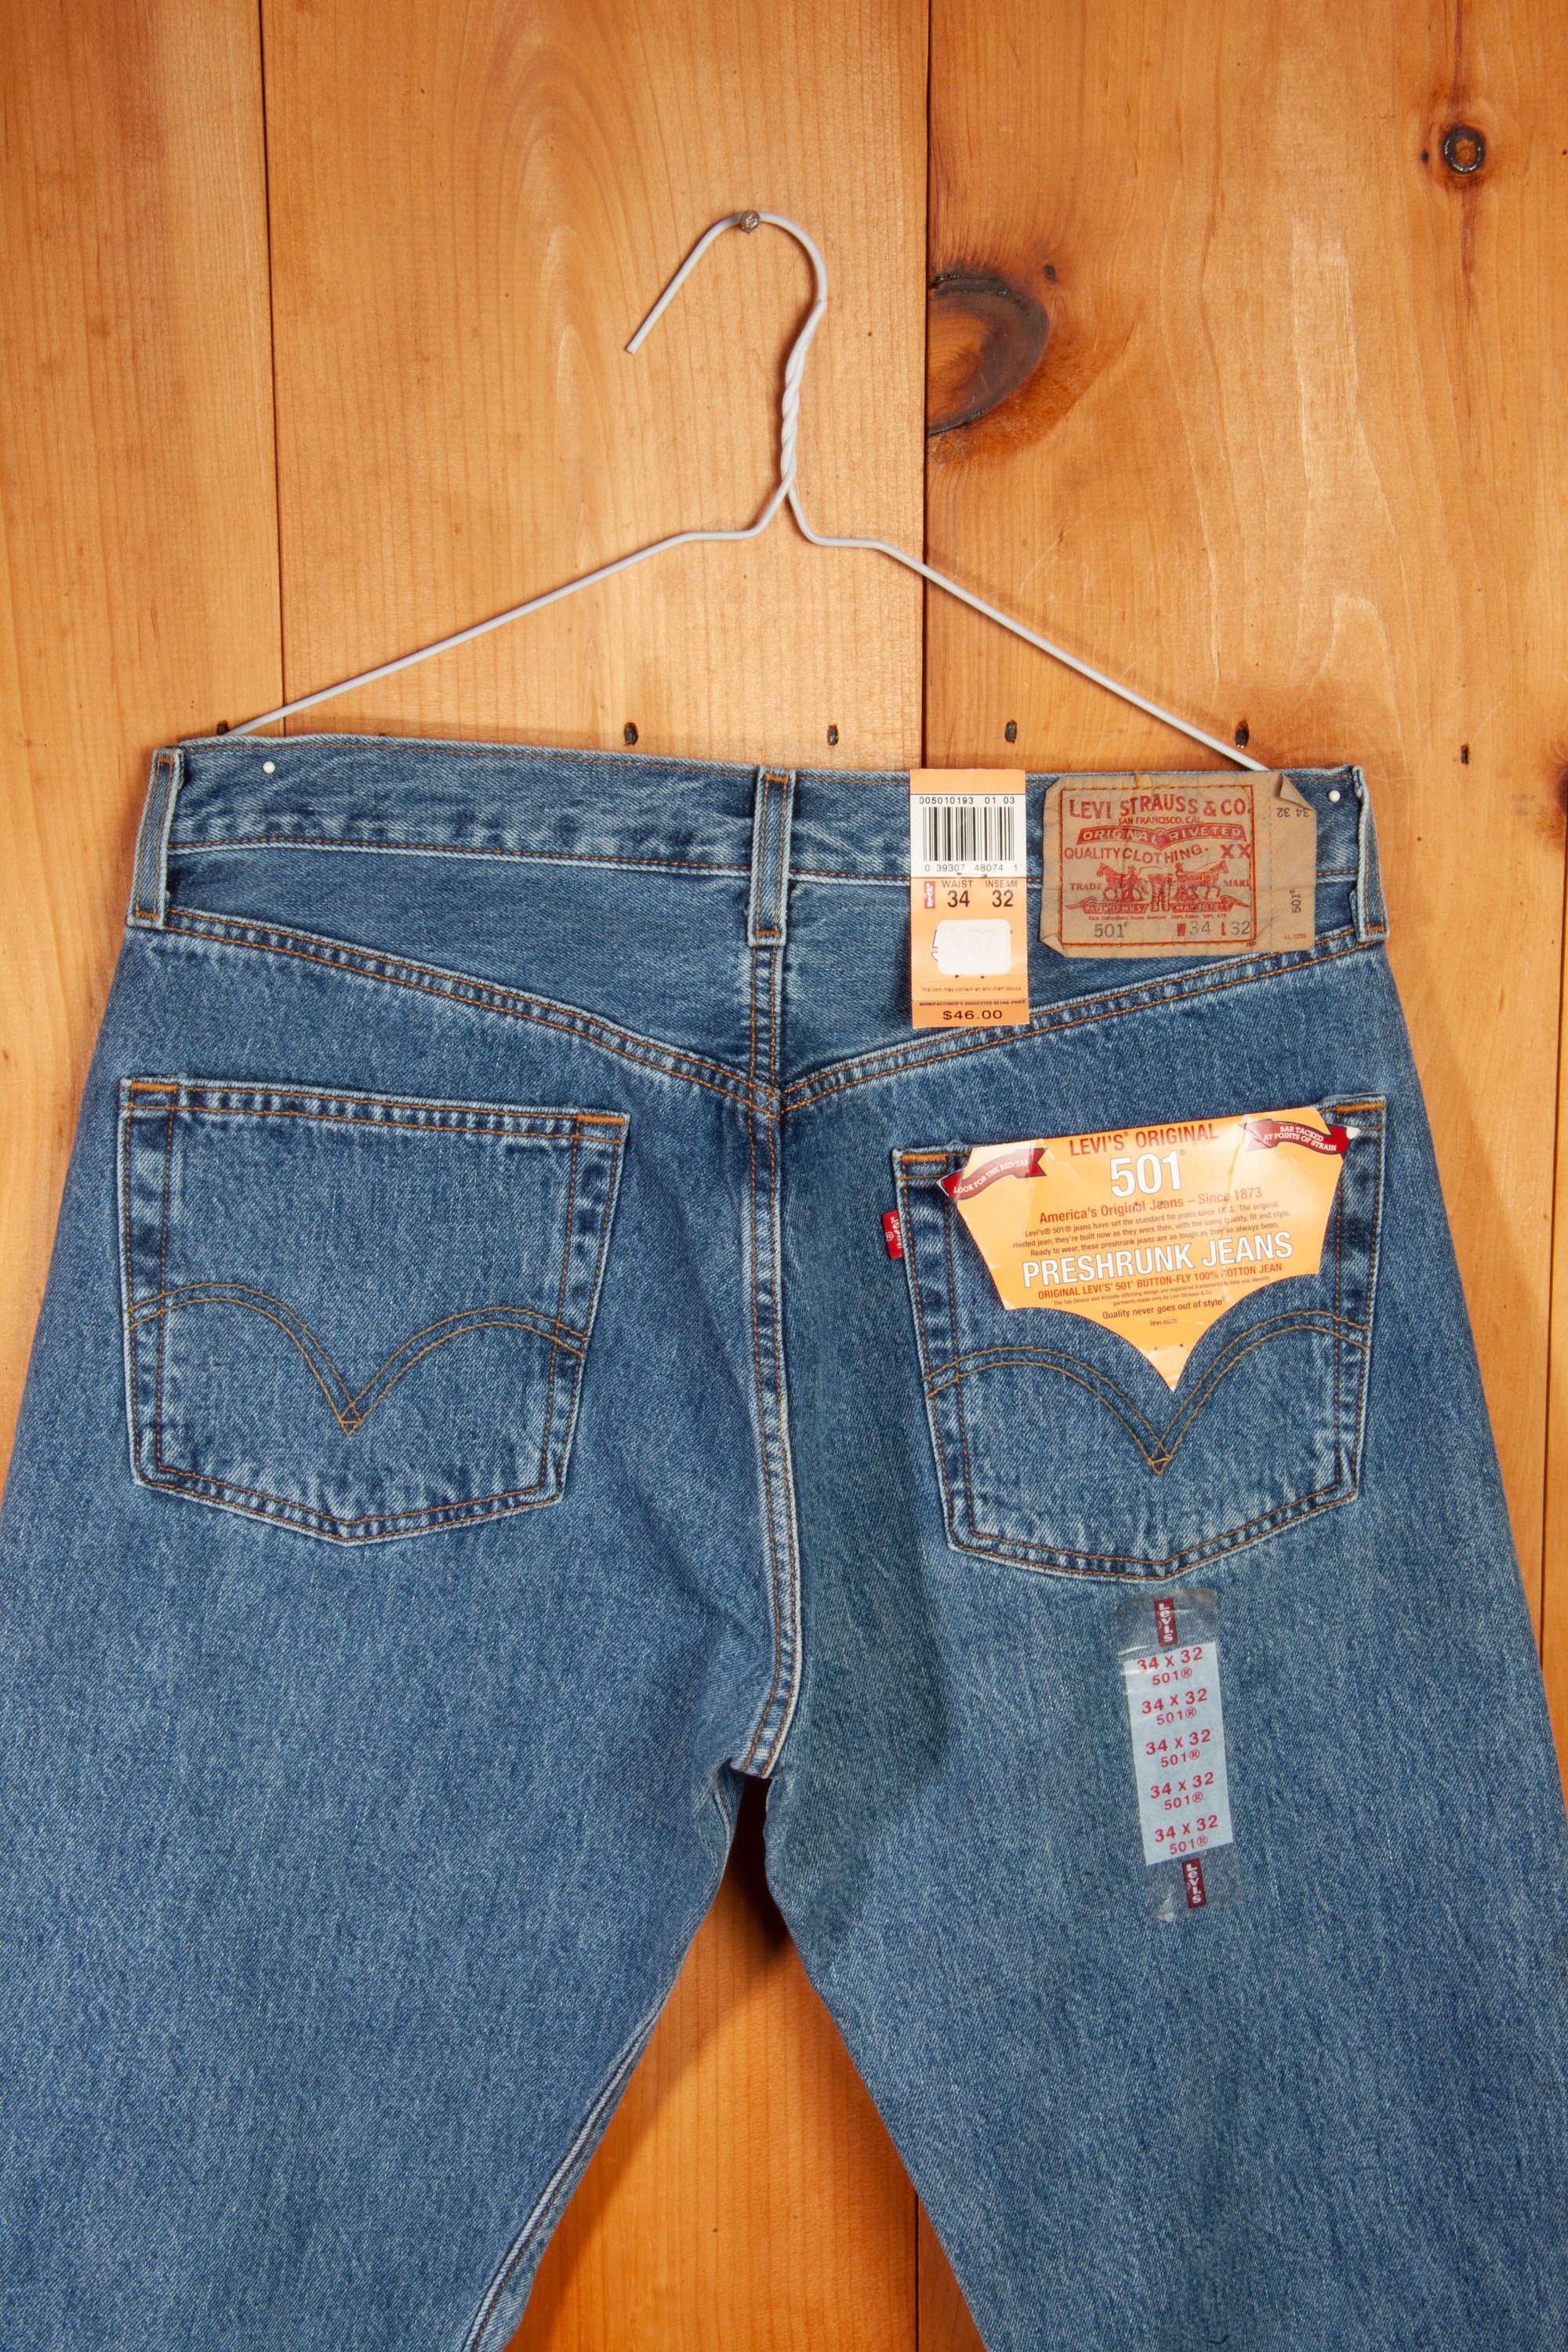 Vintage Levis 501 Jeans Deadstock with Original Tags 34 X 32 - Etsy